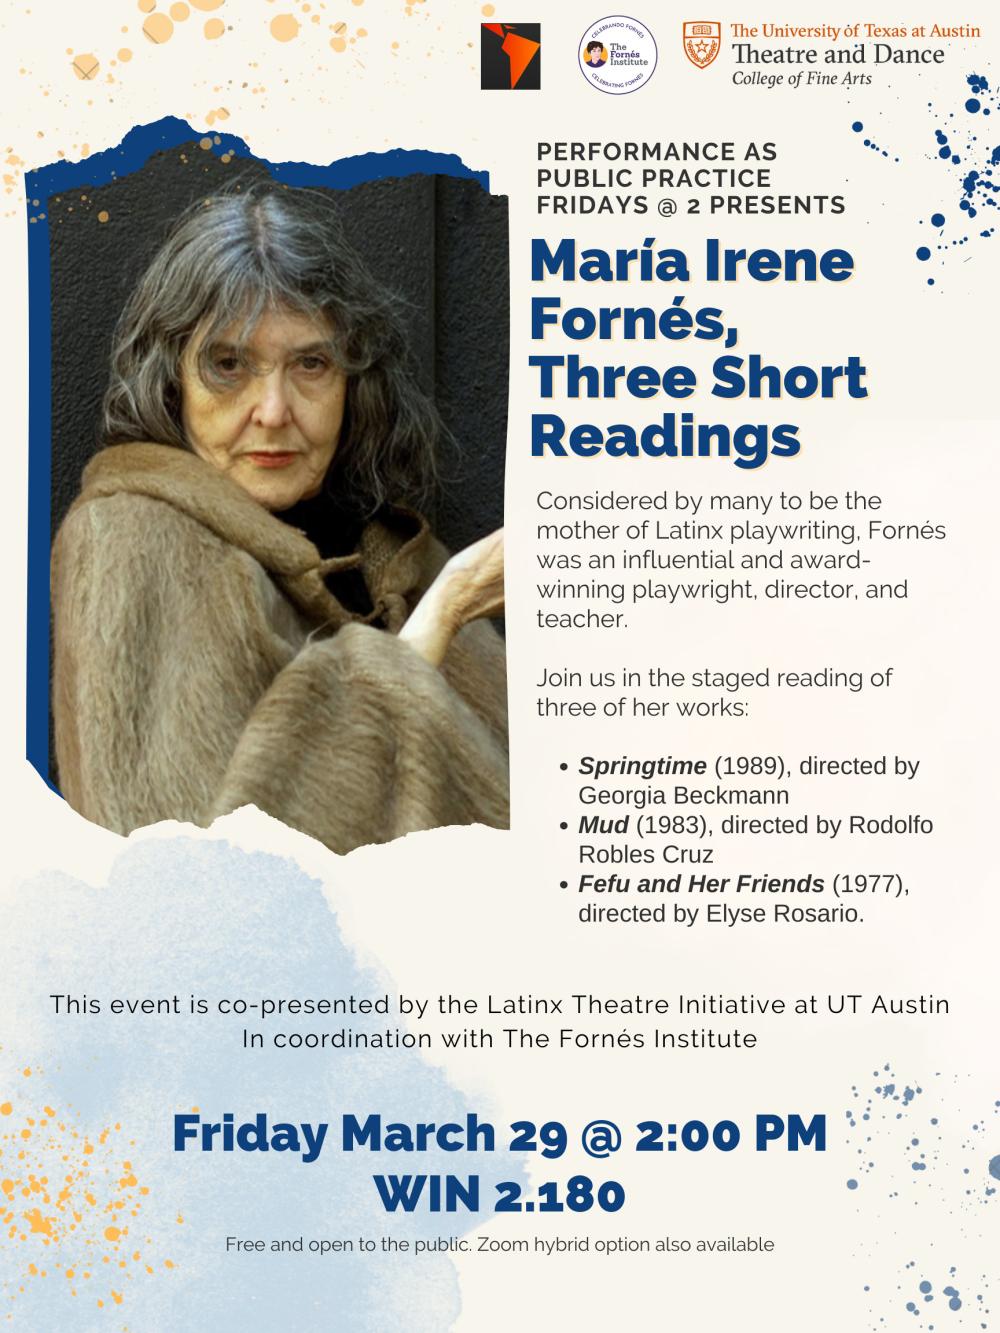 Poster for PPP's presentation of three readings of María Irene Fornés' plays, featuring a photo of Fornés